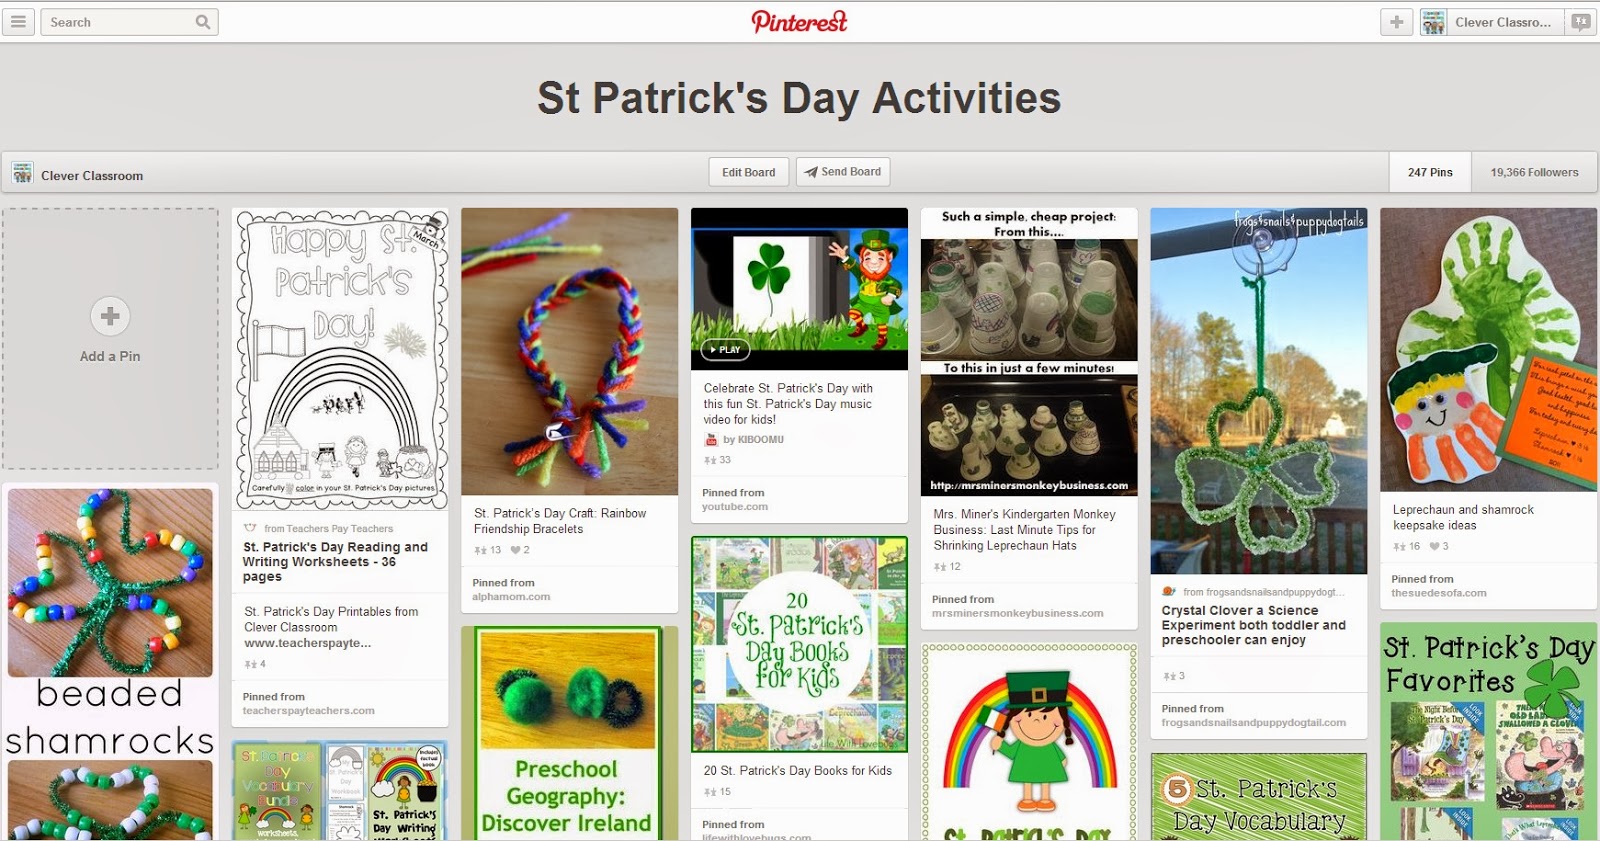 St Patrick's Day Resources and Ideas Pinterest board Clever Classroom